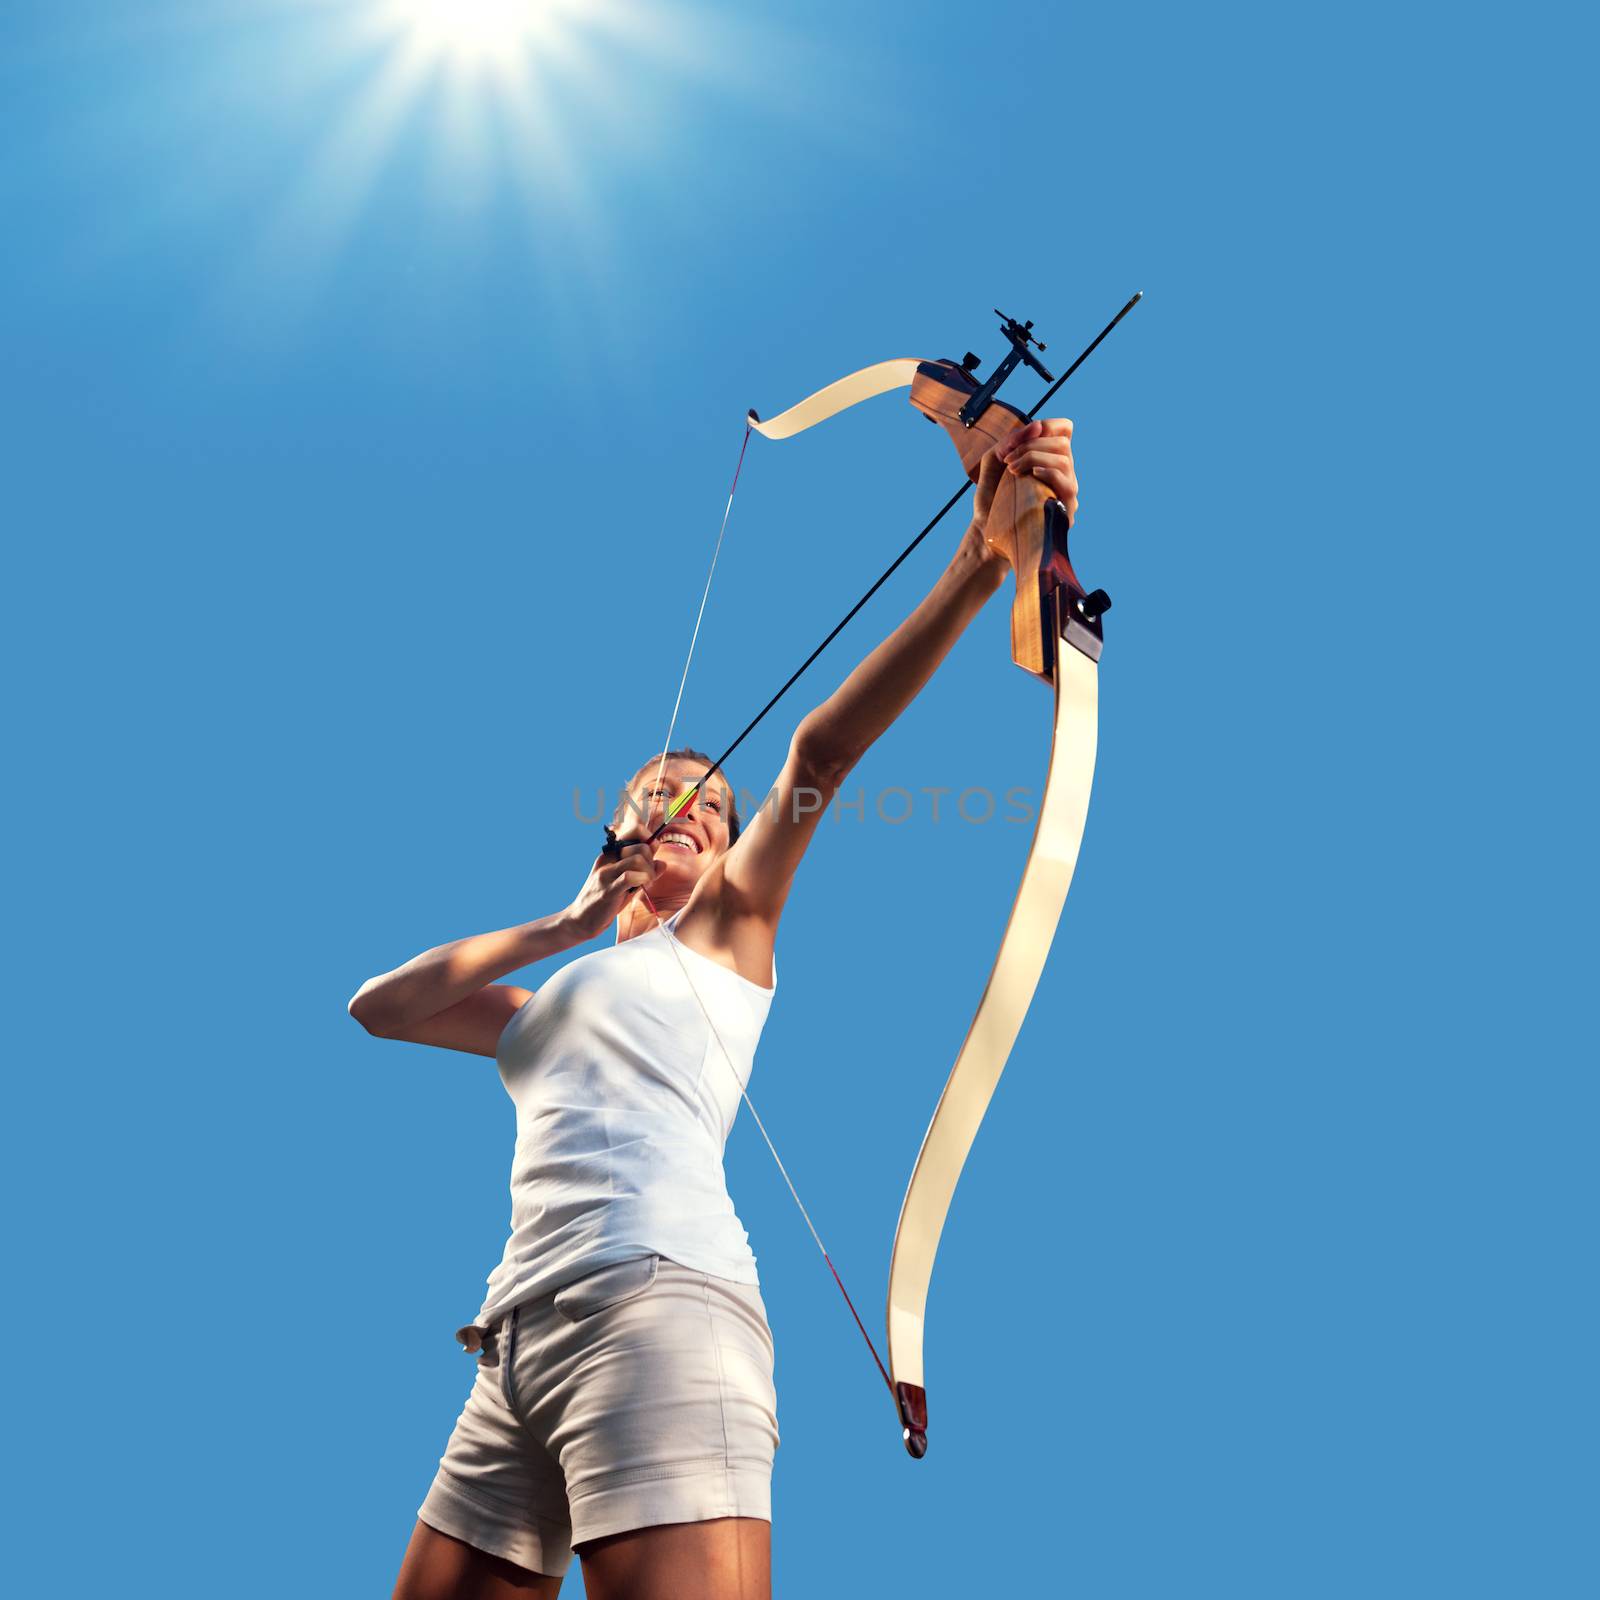 Attractive woman aiming with bow and arrow with blue sky on background.